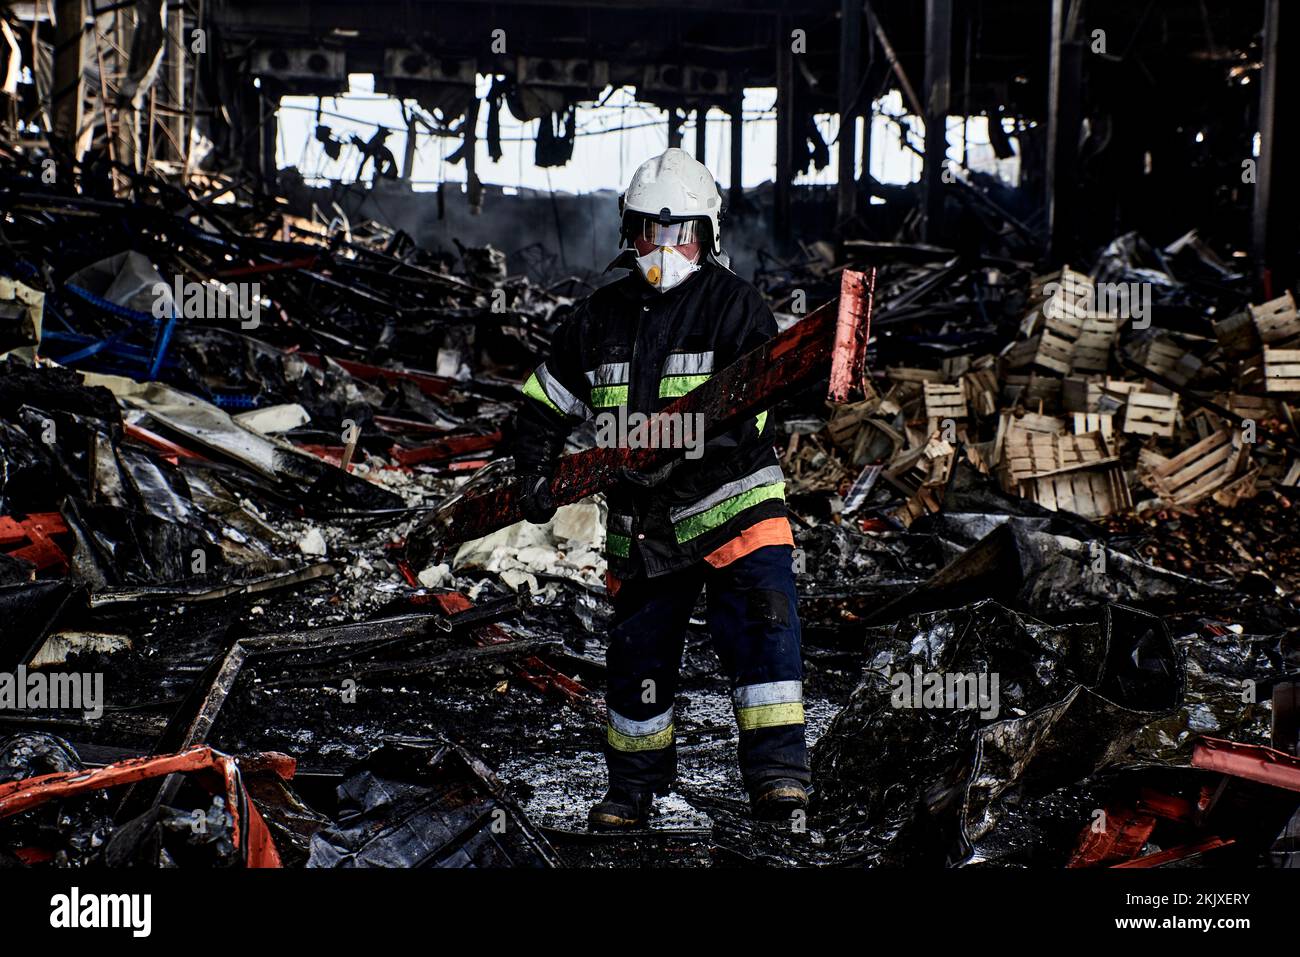 Antonin Burat / Le Pictorium -  War in Ukraine: David stands up to Goliath -  29/3/2022  -  Ukraine / Kyiv  -  Firefighters clearing the ruins of a wa Stock Photo